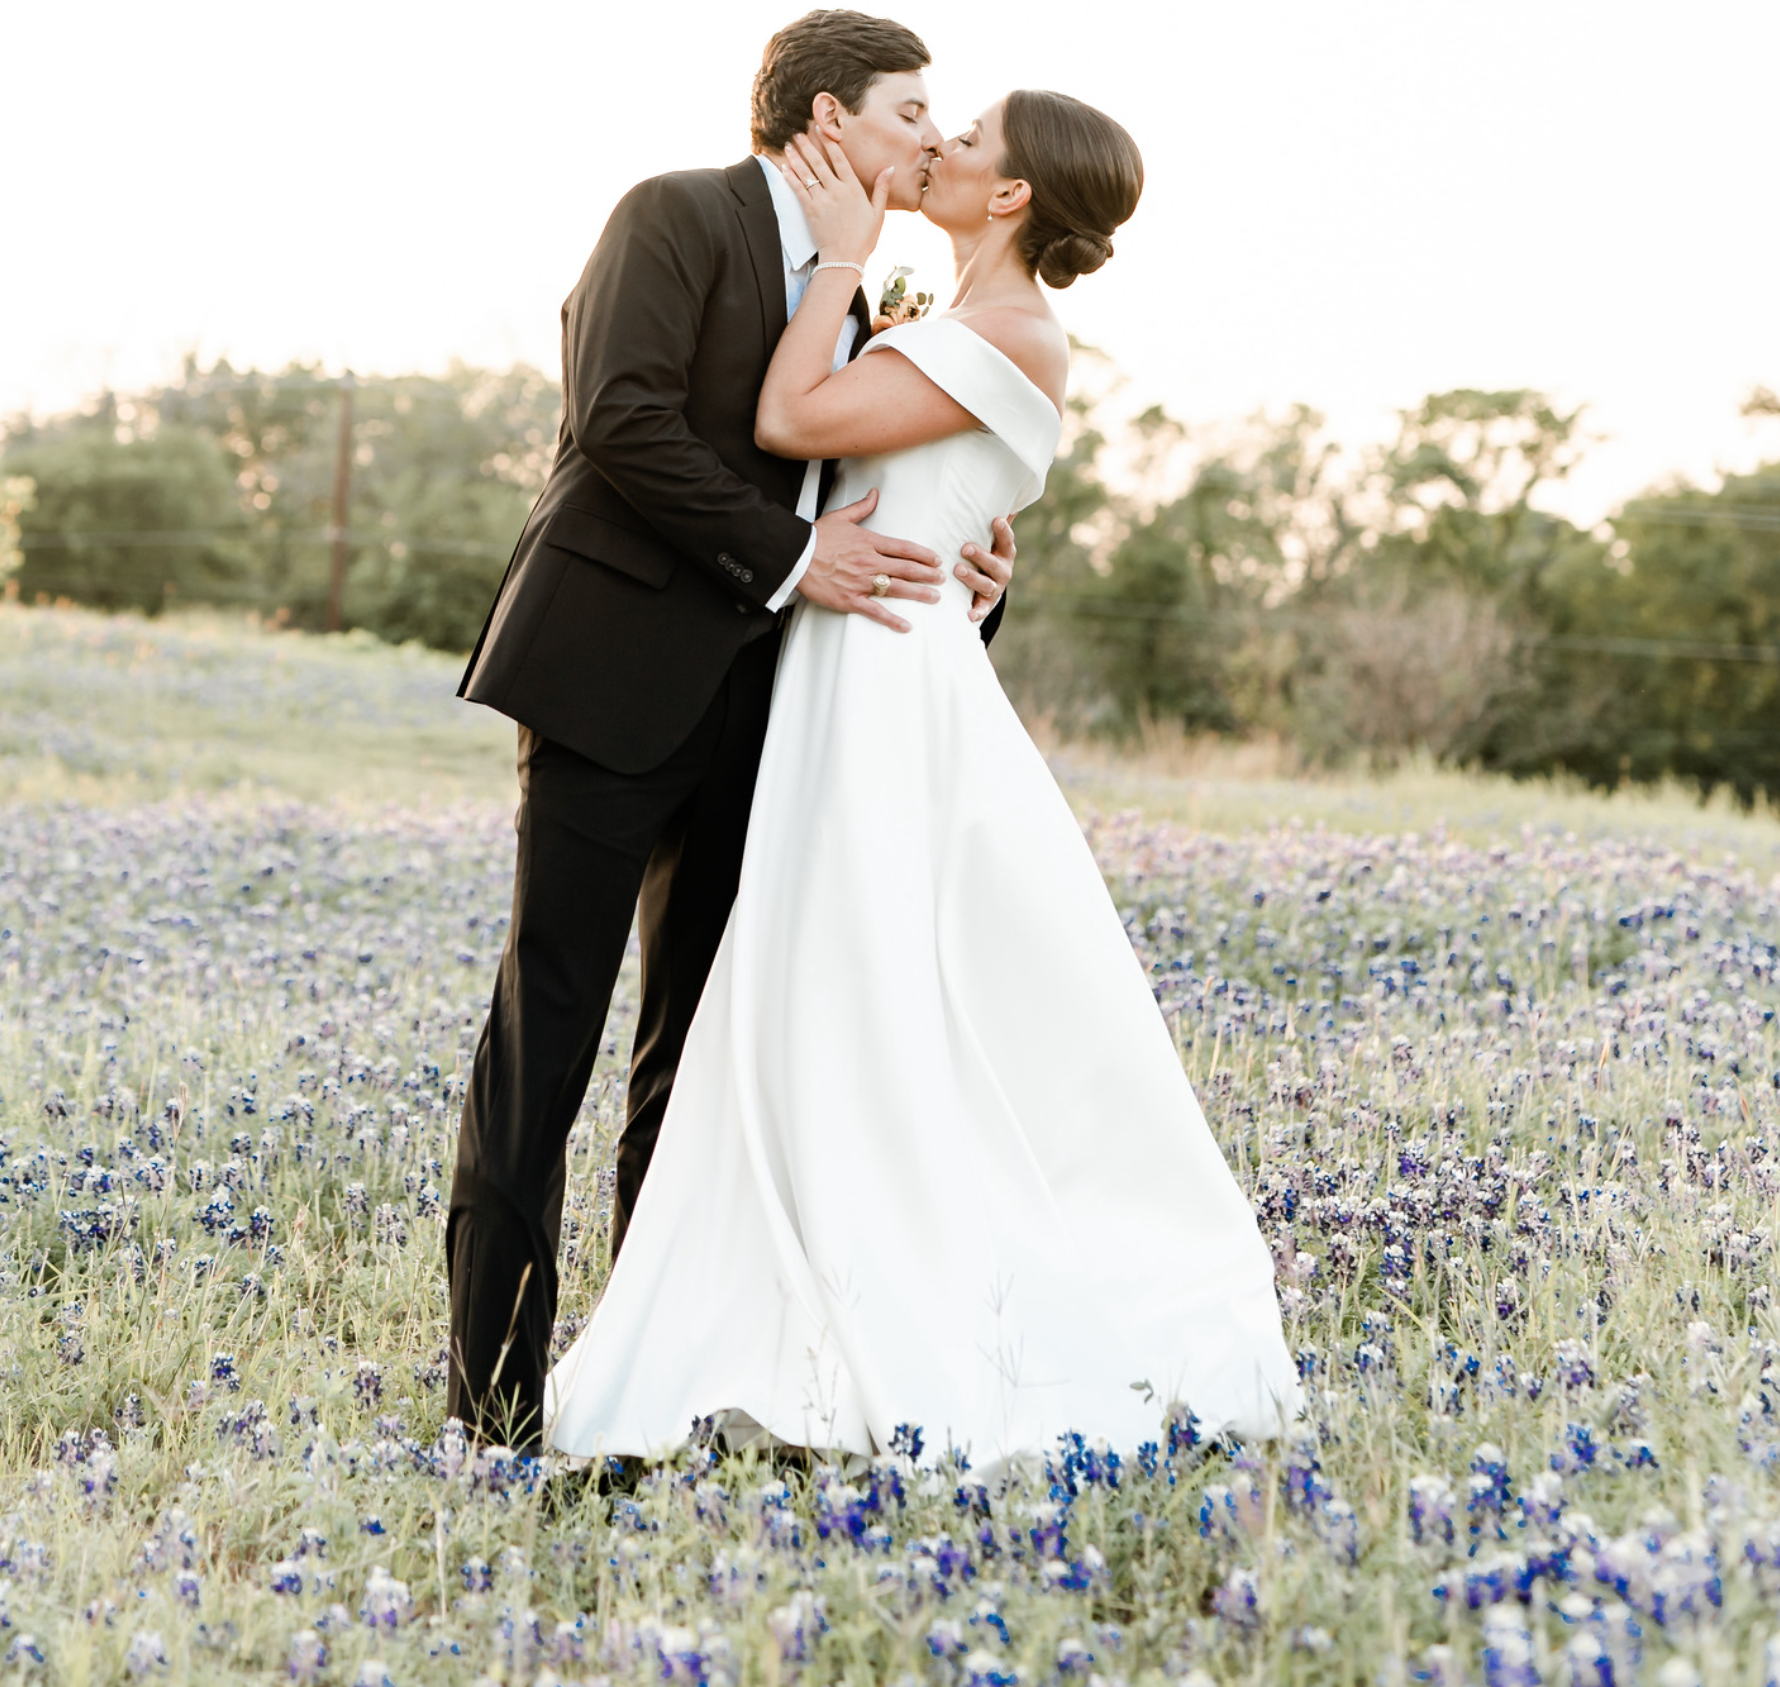 Find Wedding Photographers in Houston | Photo: Still Miracle Photography